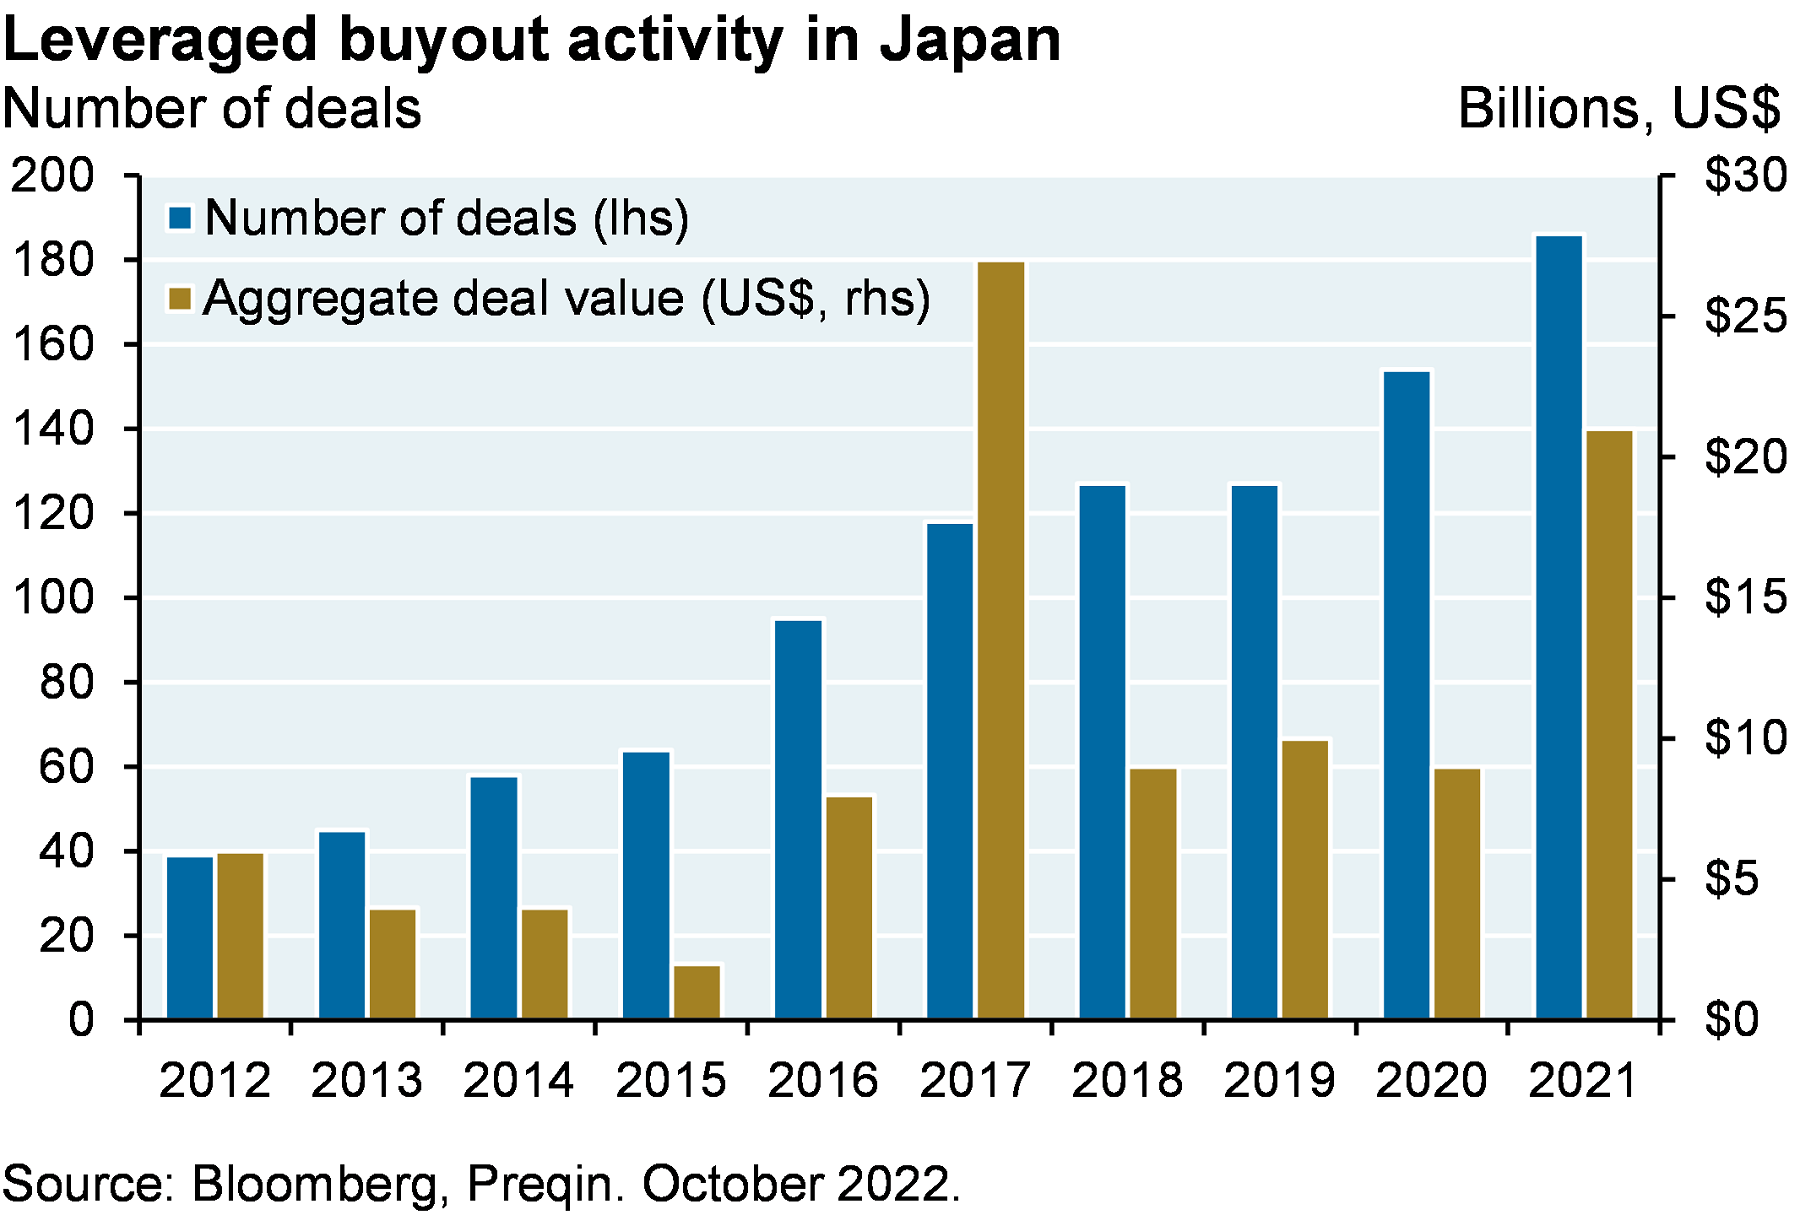 Leveraged buyout activity in Japan